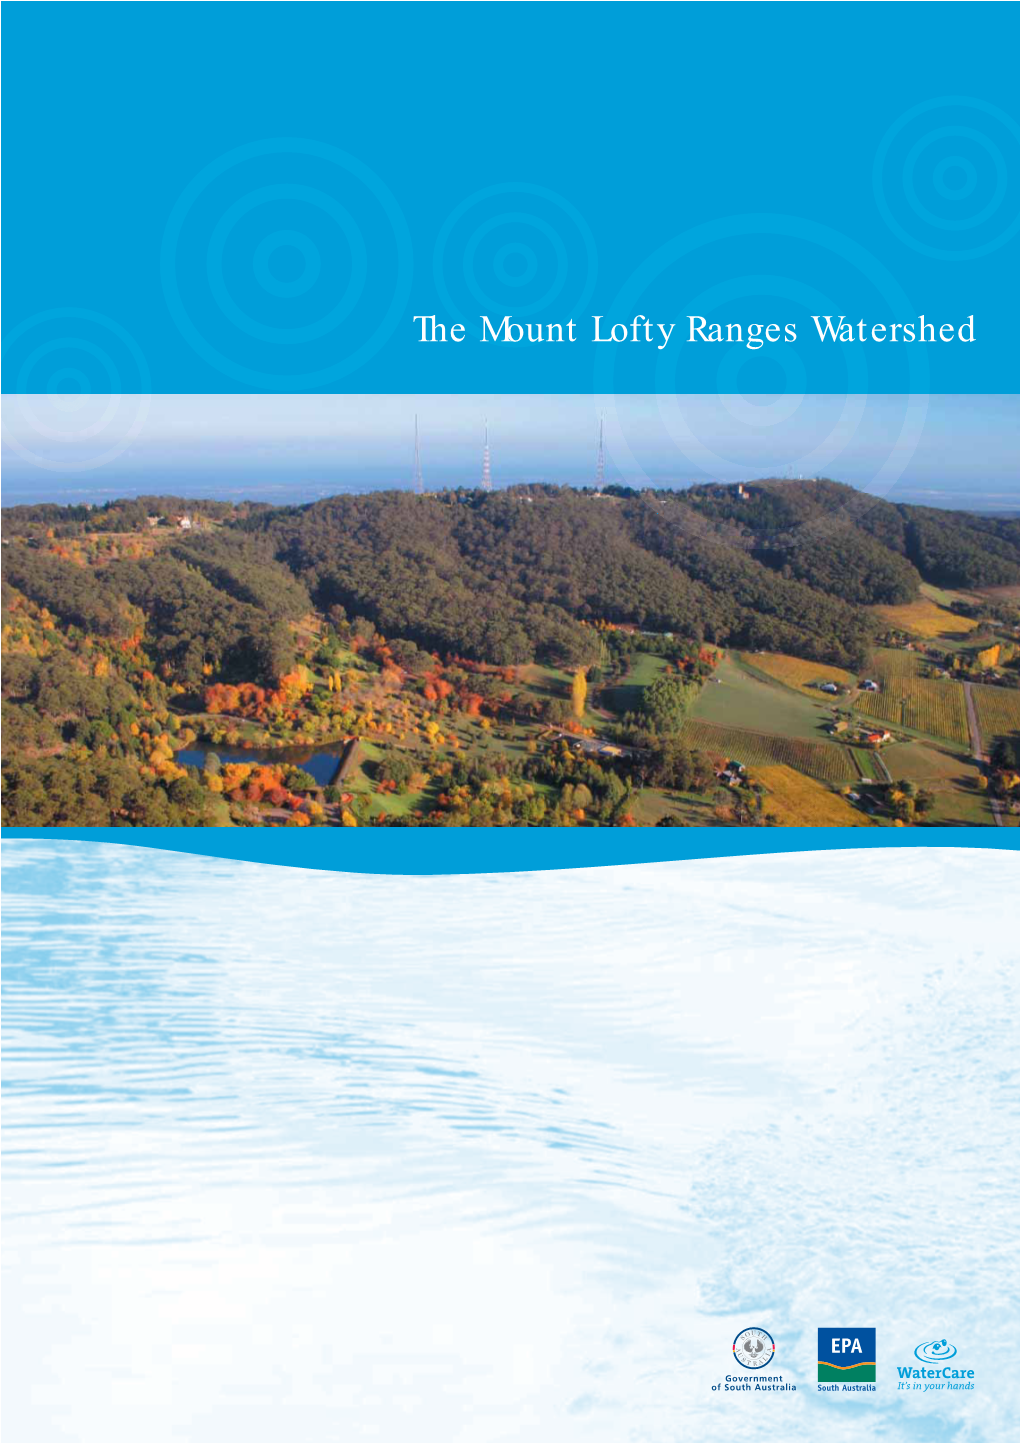 The Mount Lofty Ranges Watershed the Mount Lofty Ranges Watershed